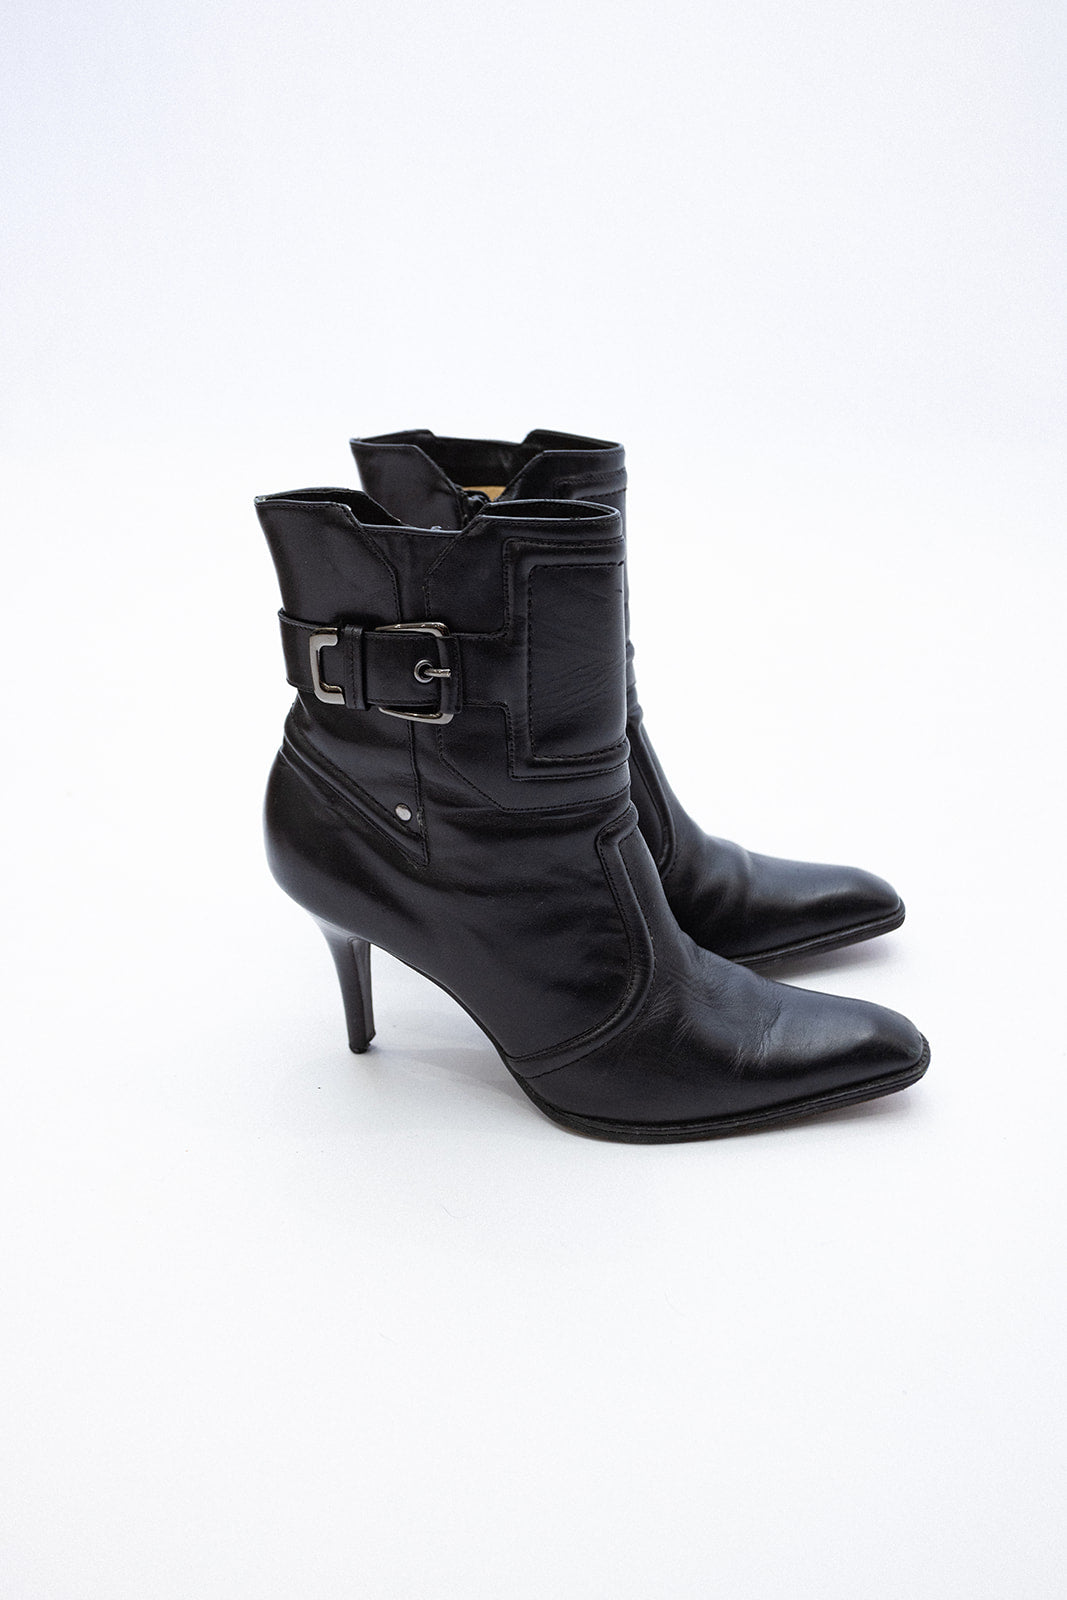 Cole Haan Black Leather Boot With Buckle Detail